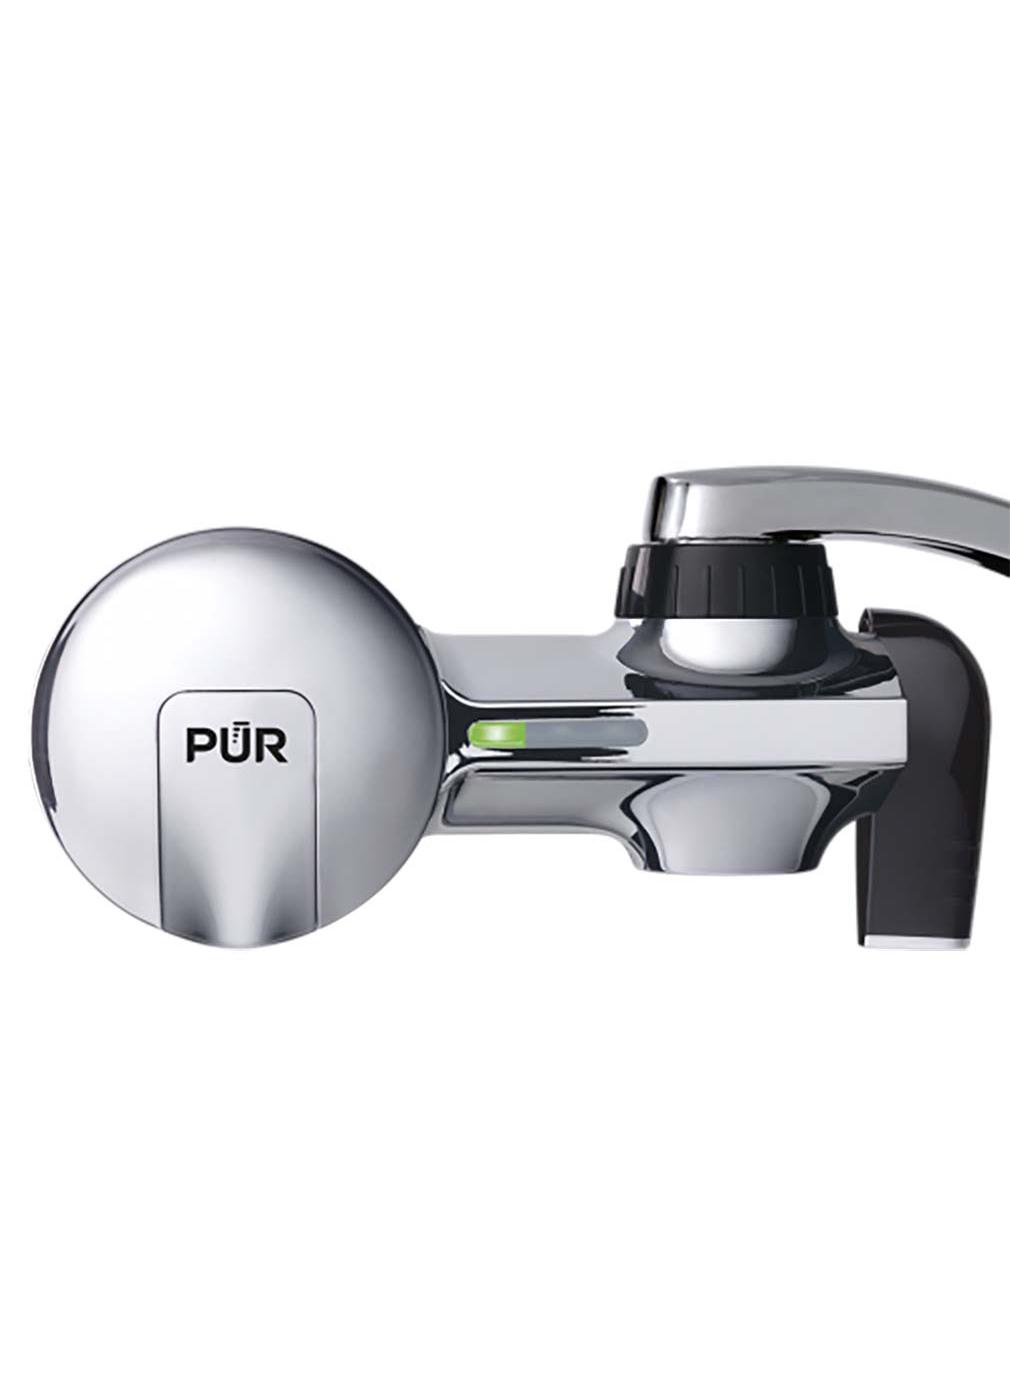 PUR Plus Horizontal Faucet Water Filtration System - Chrome; image 2 of 2